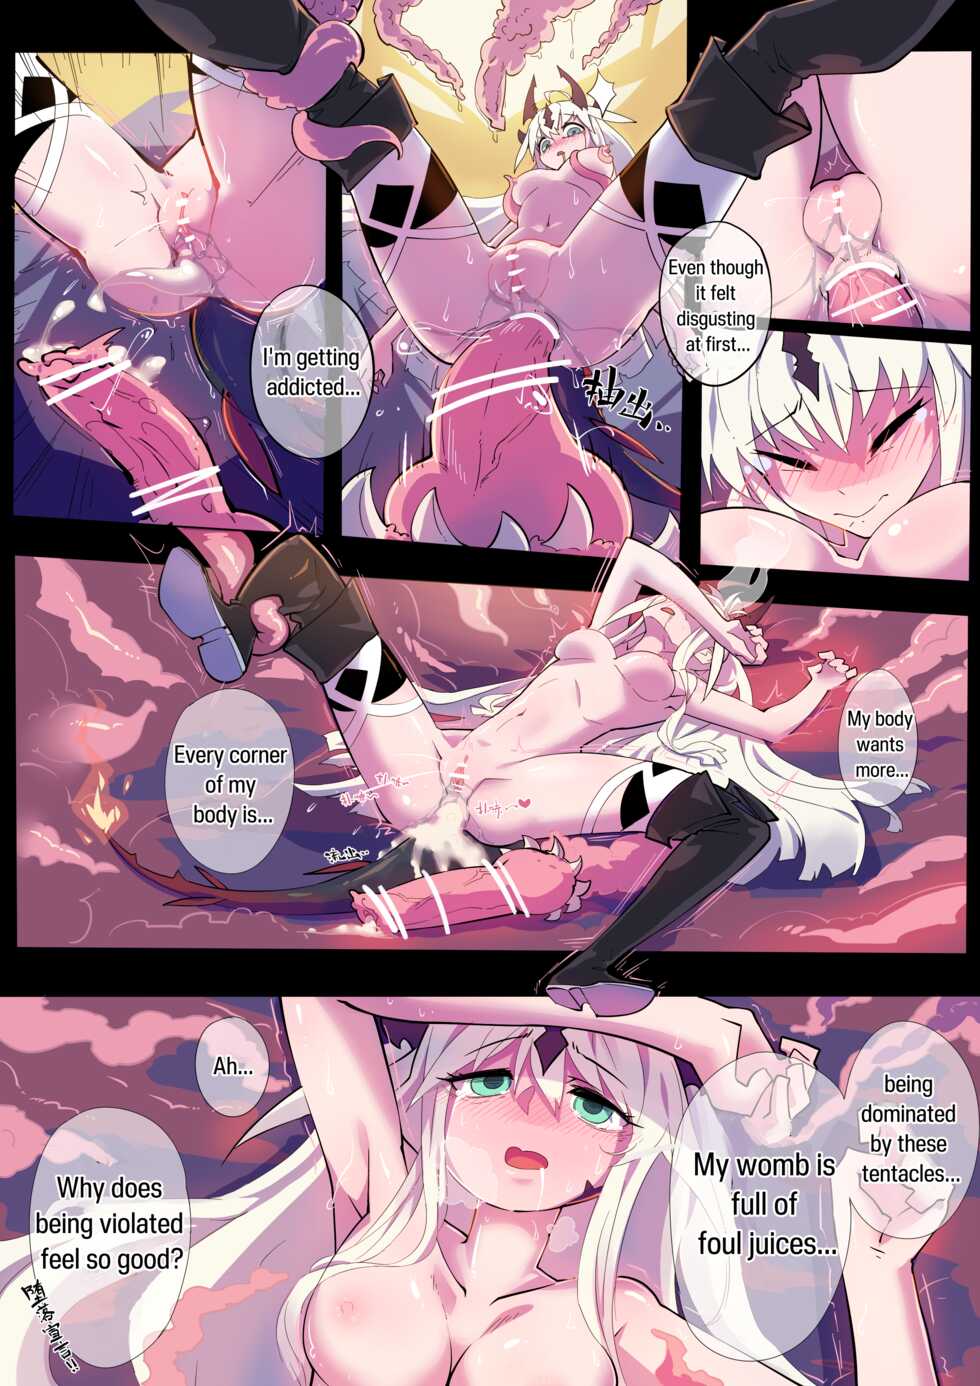 [Animarcat] ~Top Secret File: Tentacle Time~ reedround-CthulhuVSCharmder of RHODES ISLAND (Arknights) [English] - Page 14